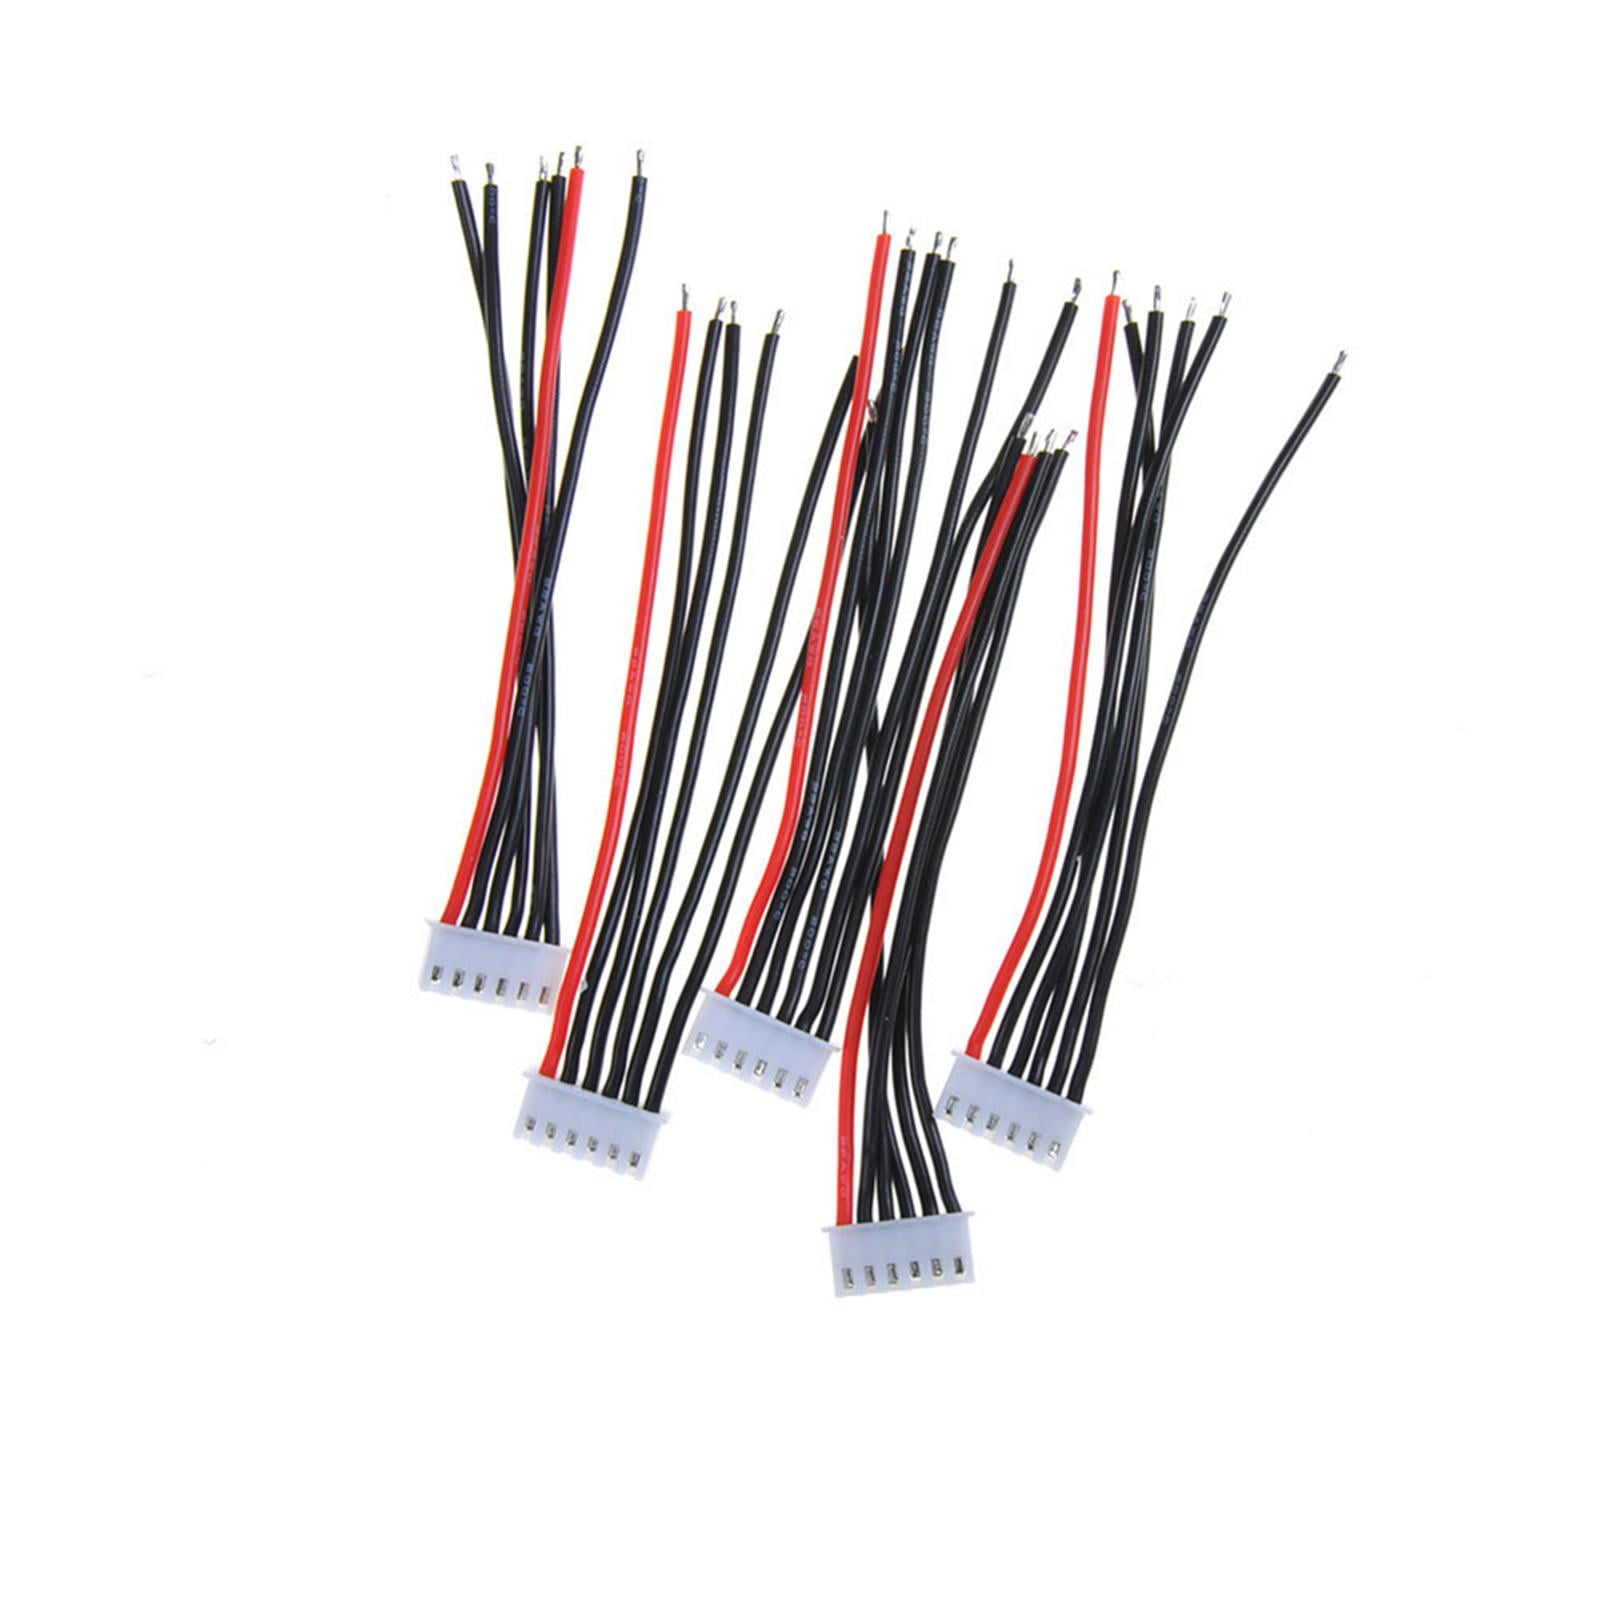 5Pcs/lot JST-XH 2S 3S 4S 5S 6S Lipo Balance Wire Extension Charge Cable Lead